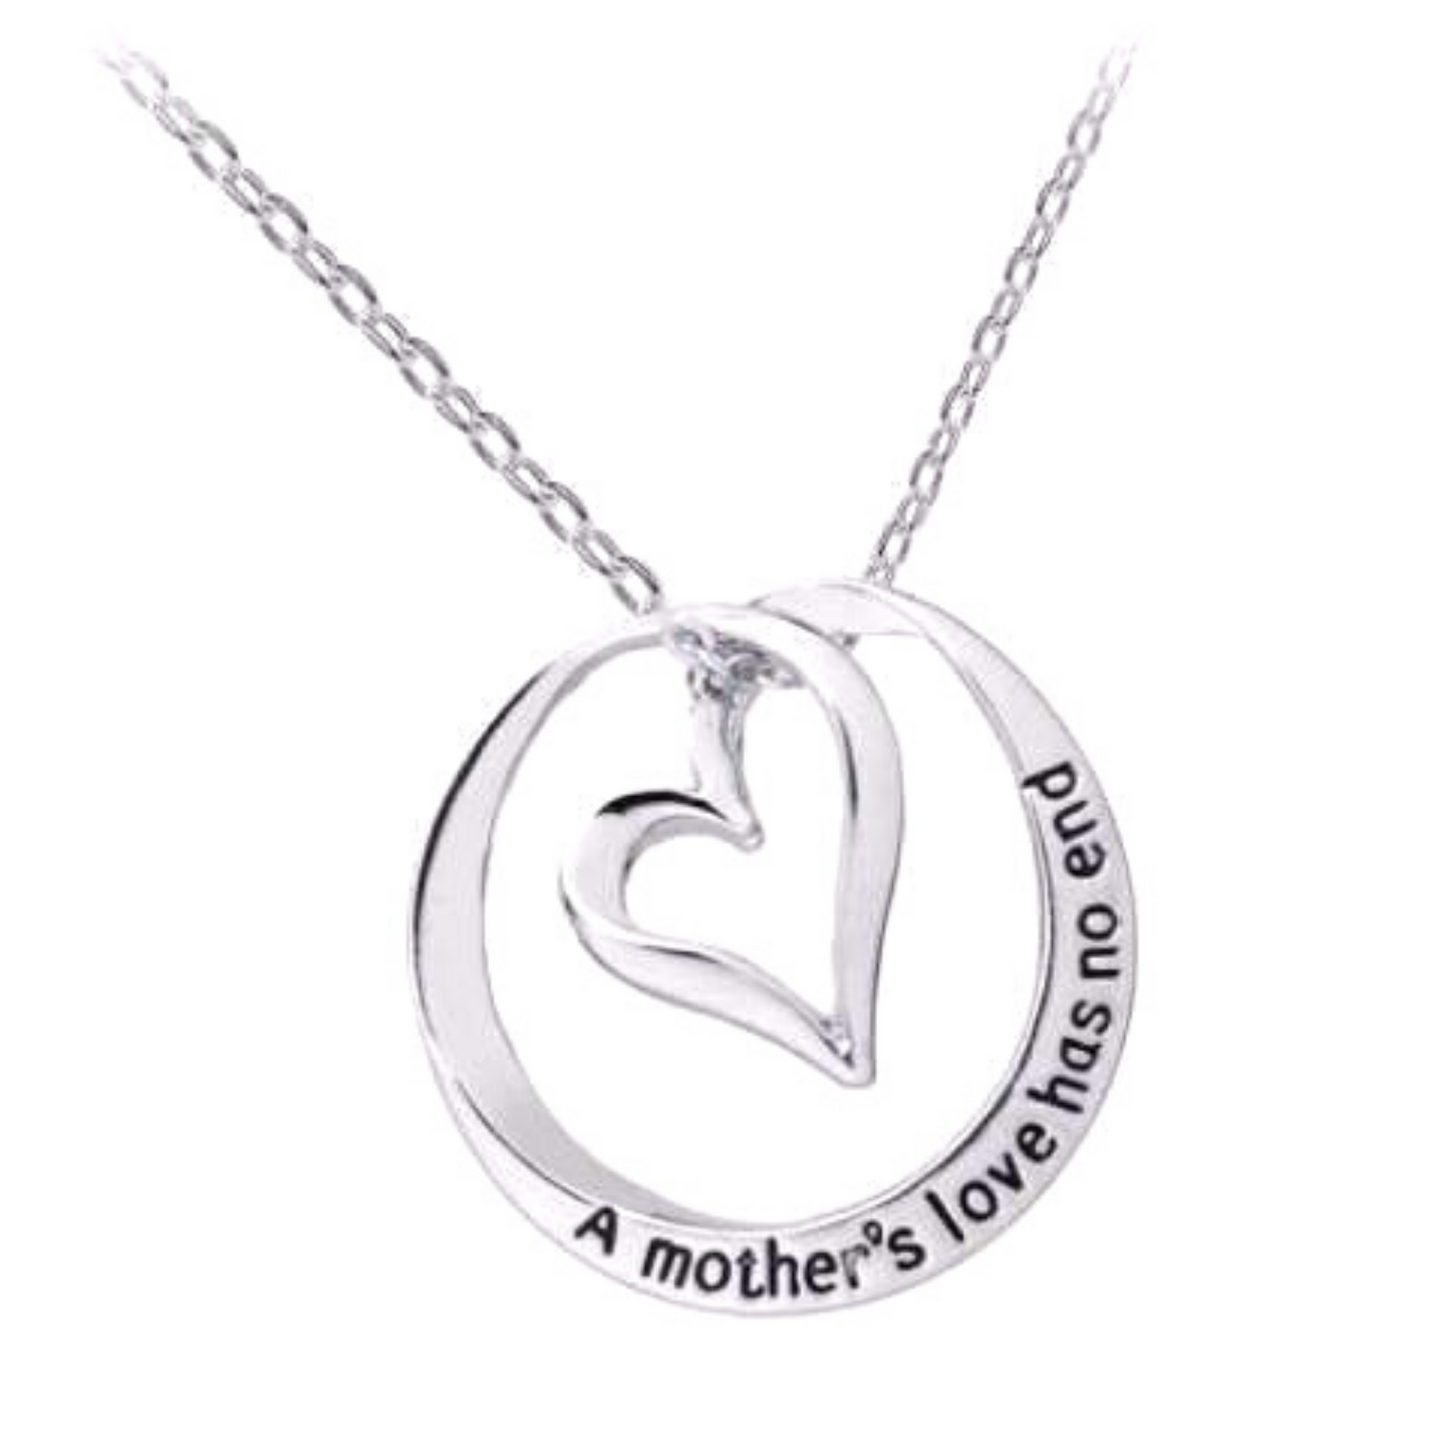 Mother's Love Has No End Inspirational Stamped Heart Necklace for Women Special Occasion in White Gold